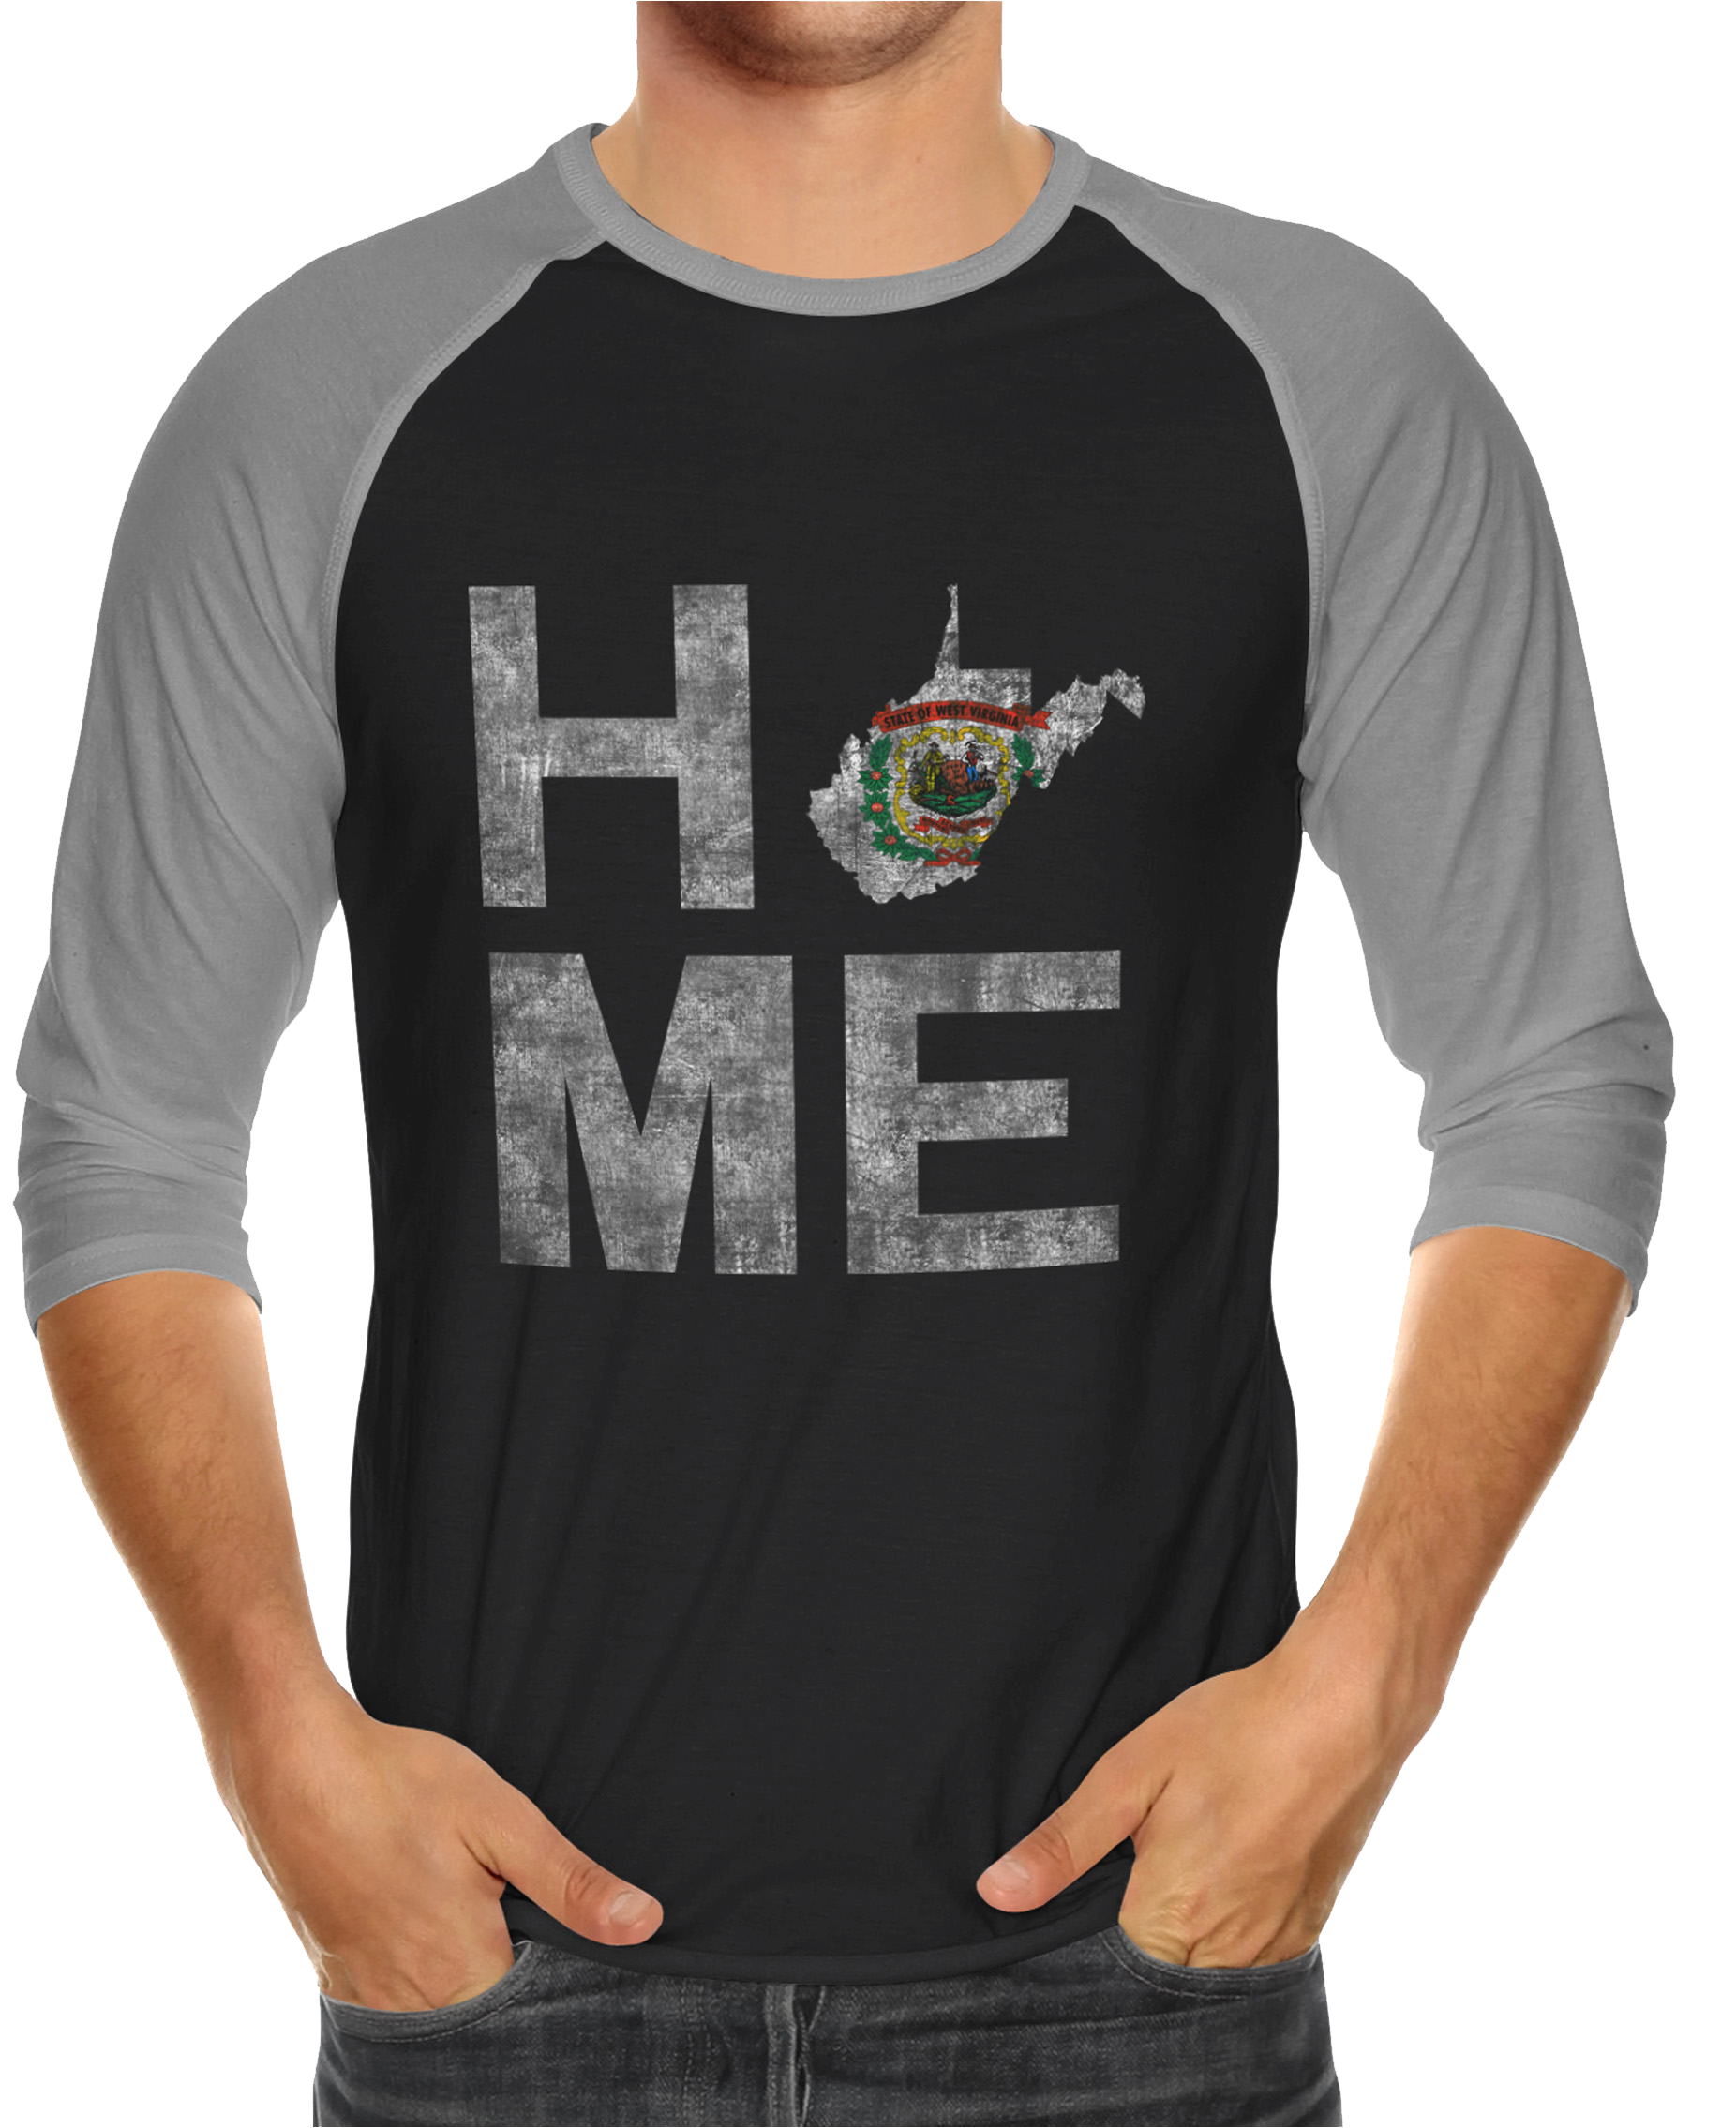 BRIEF INSANITY Home Sweet Home West Virginia Shirt